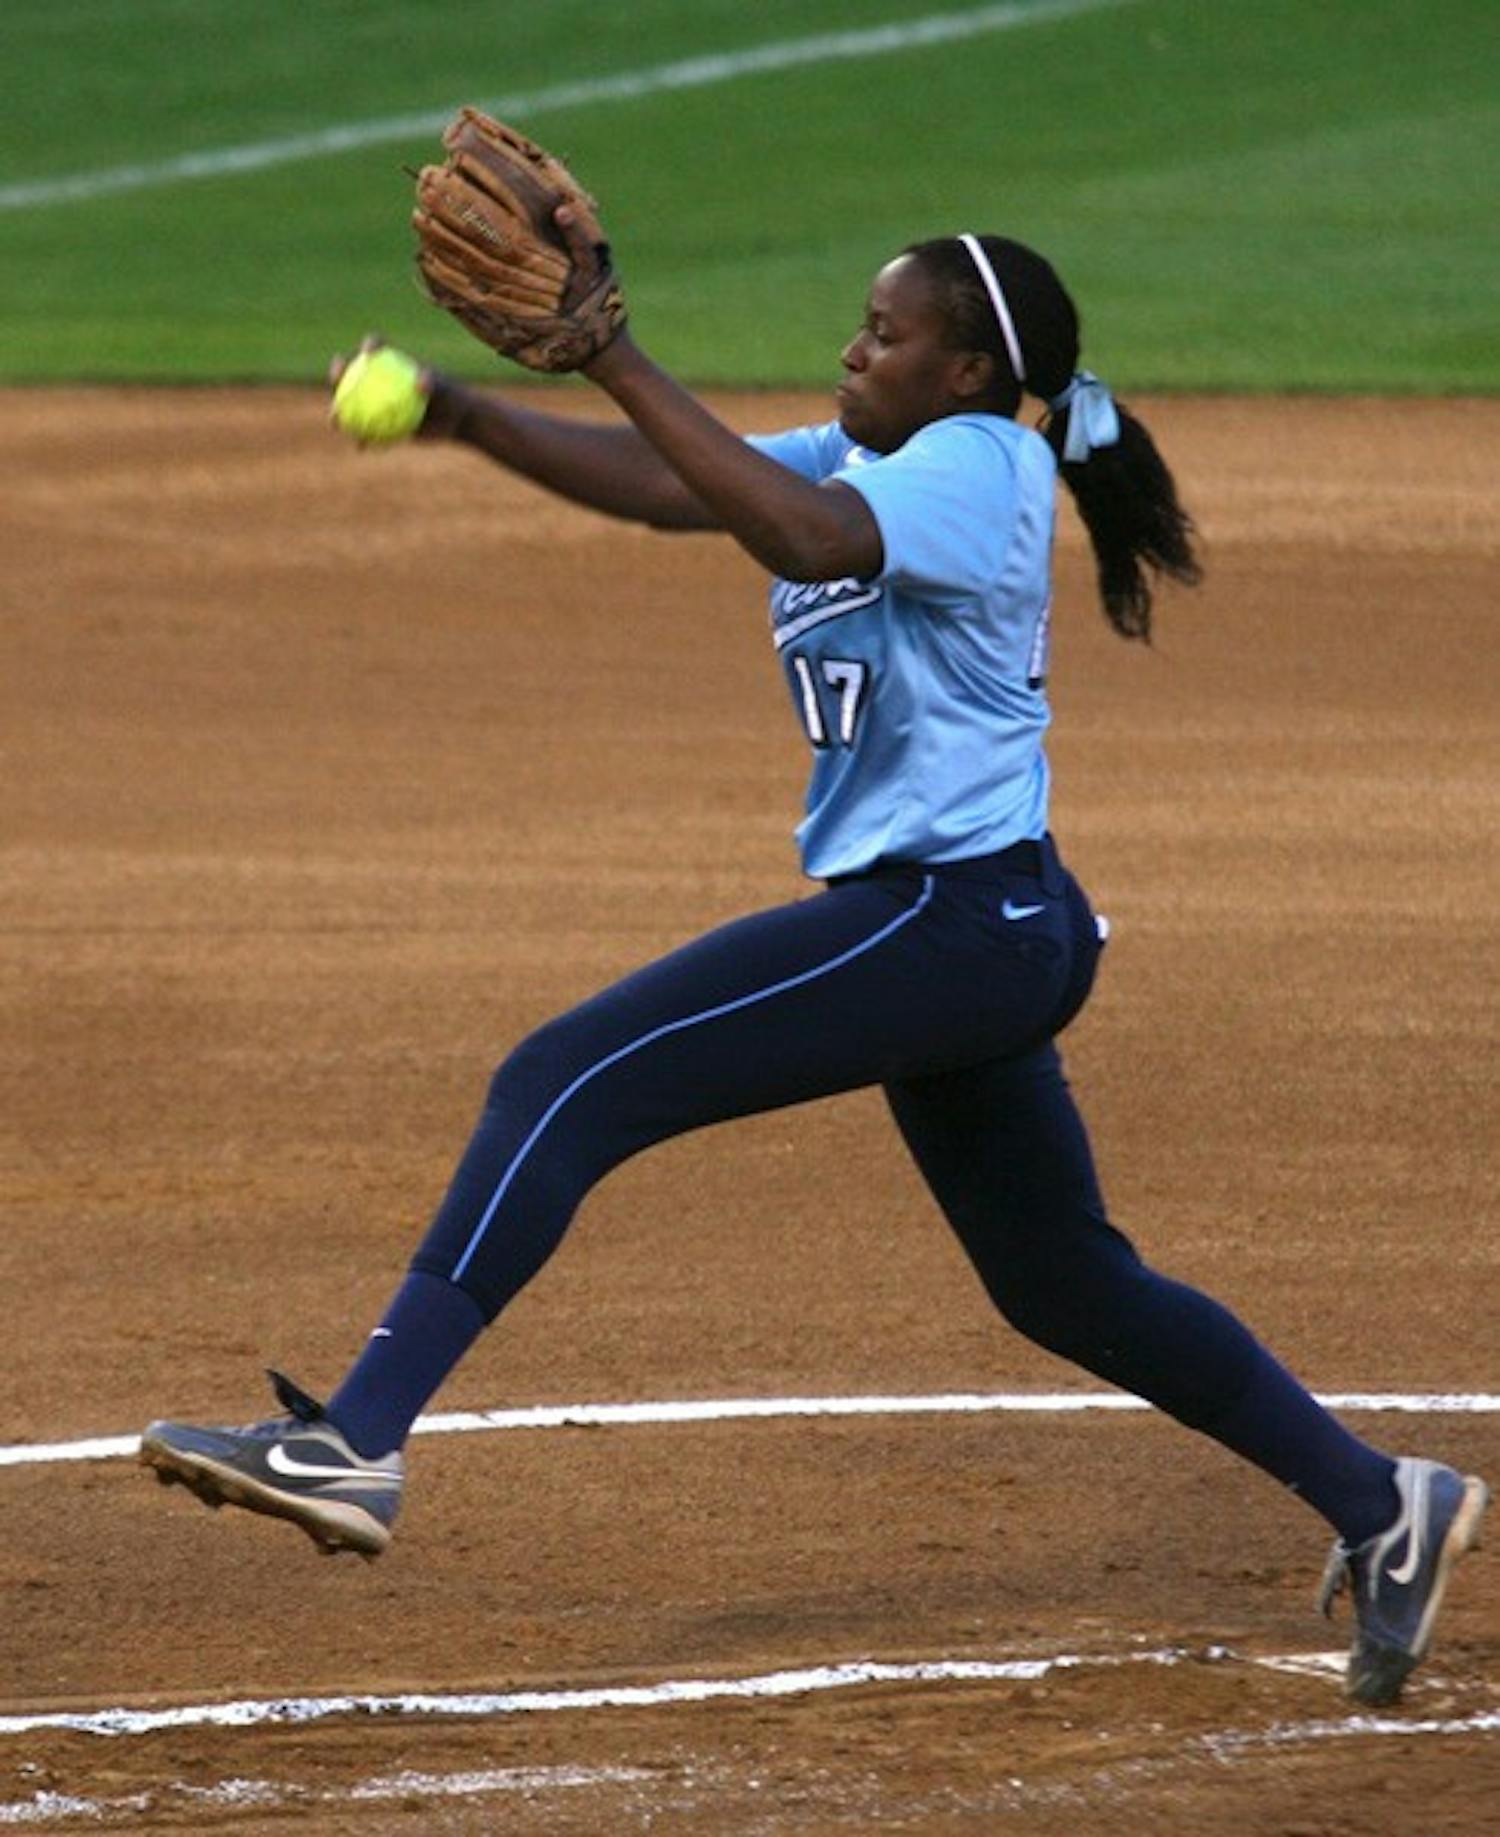 Sophomore Constance Orr pitches in Tuesday's game against Campbell. DTH/Stephen Mitchell